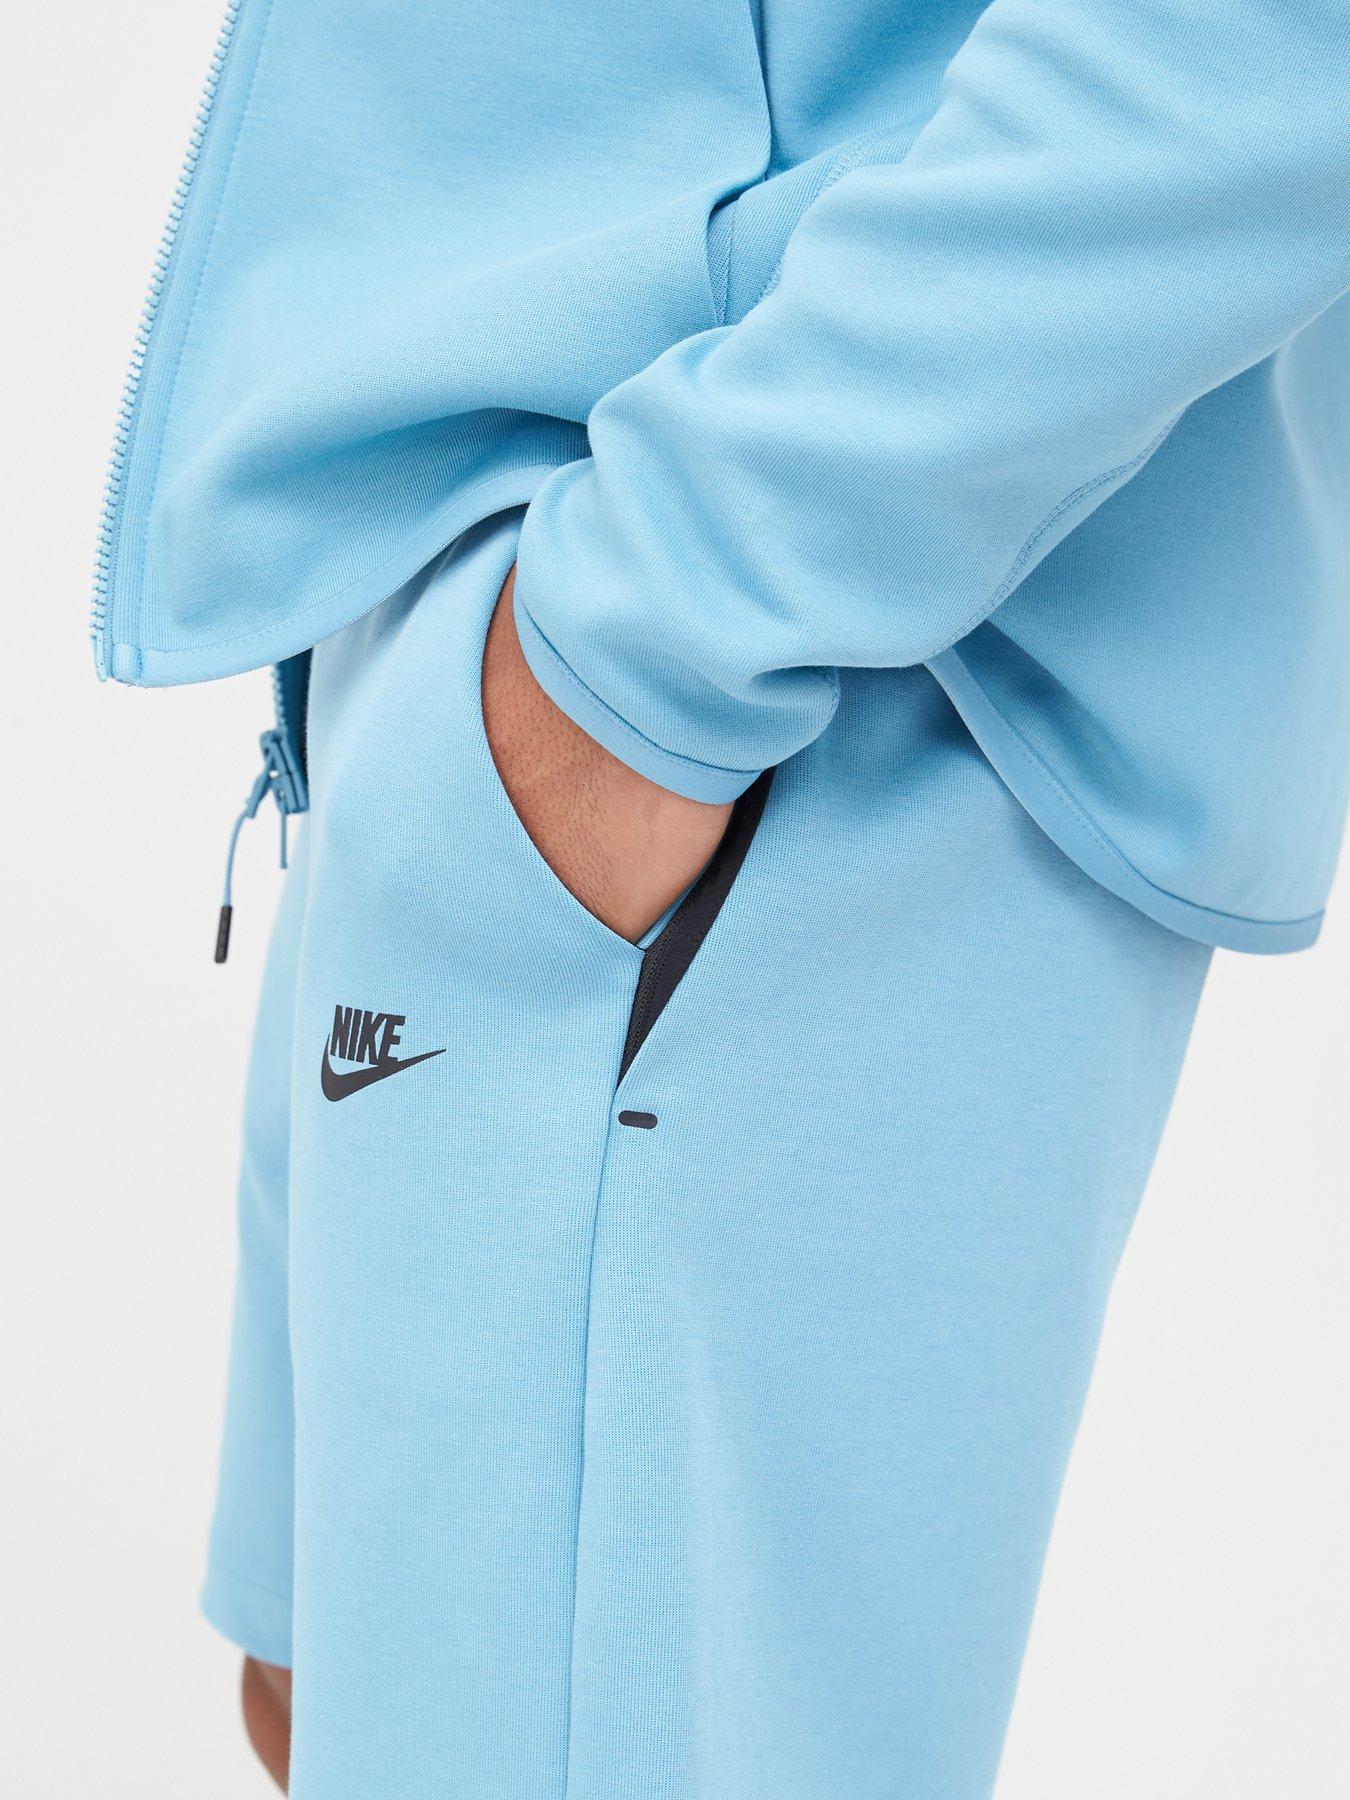 baby blue nike joggers